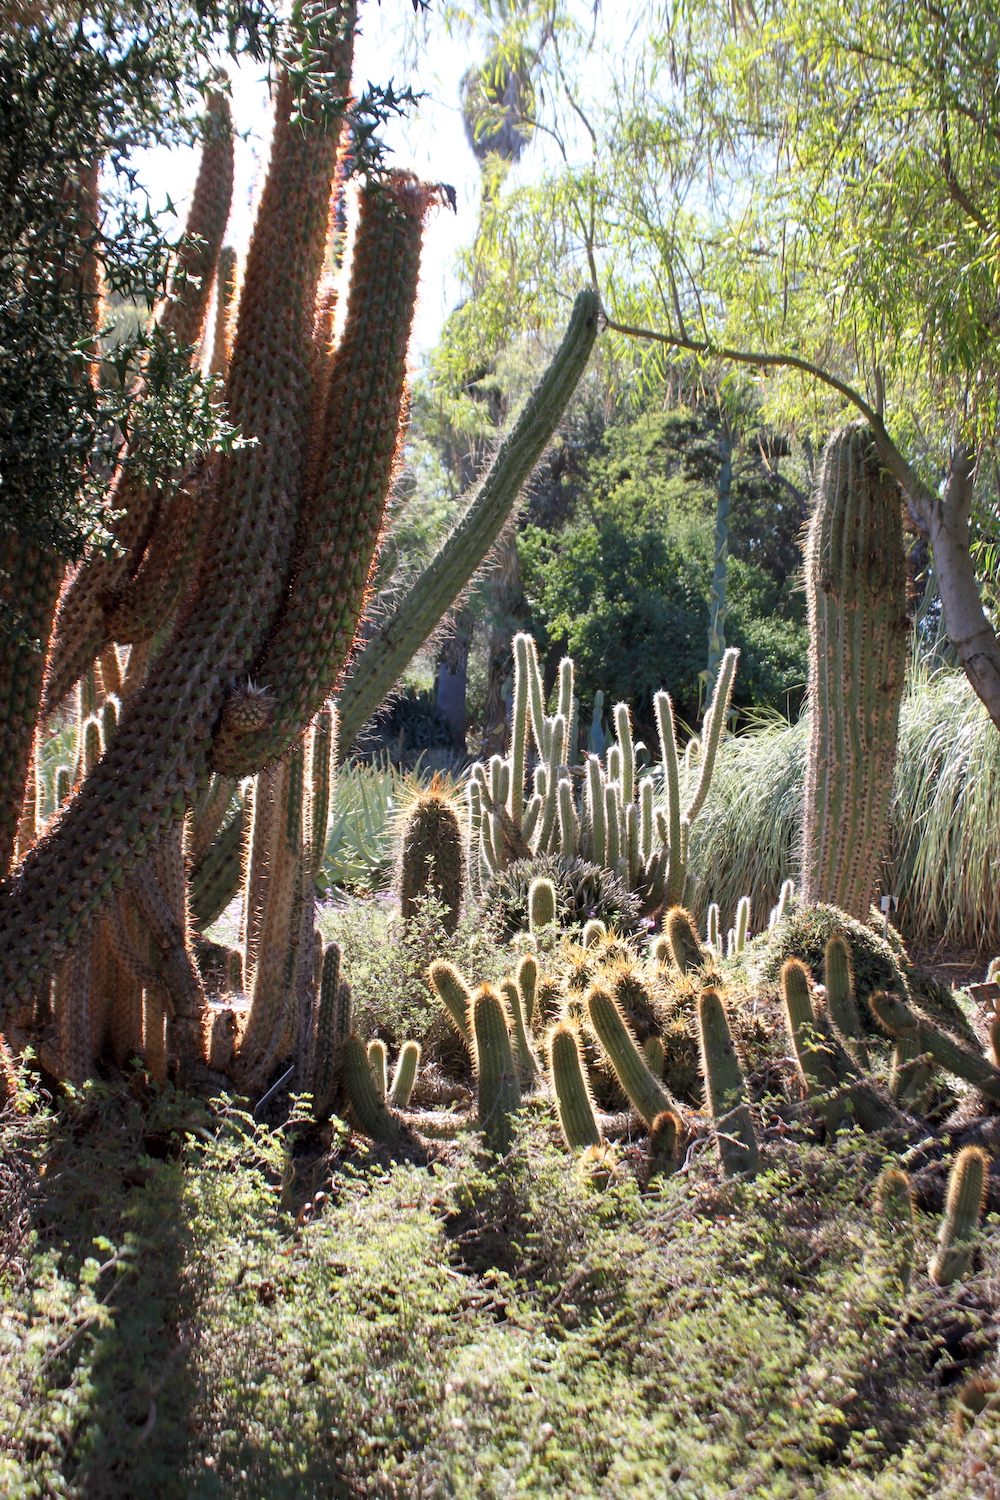 Enchanted hour in a cactus grove